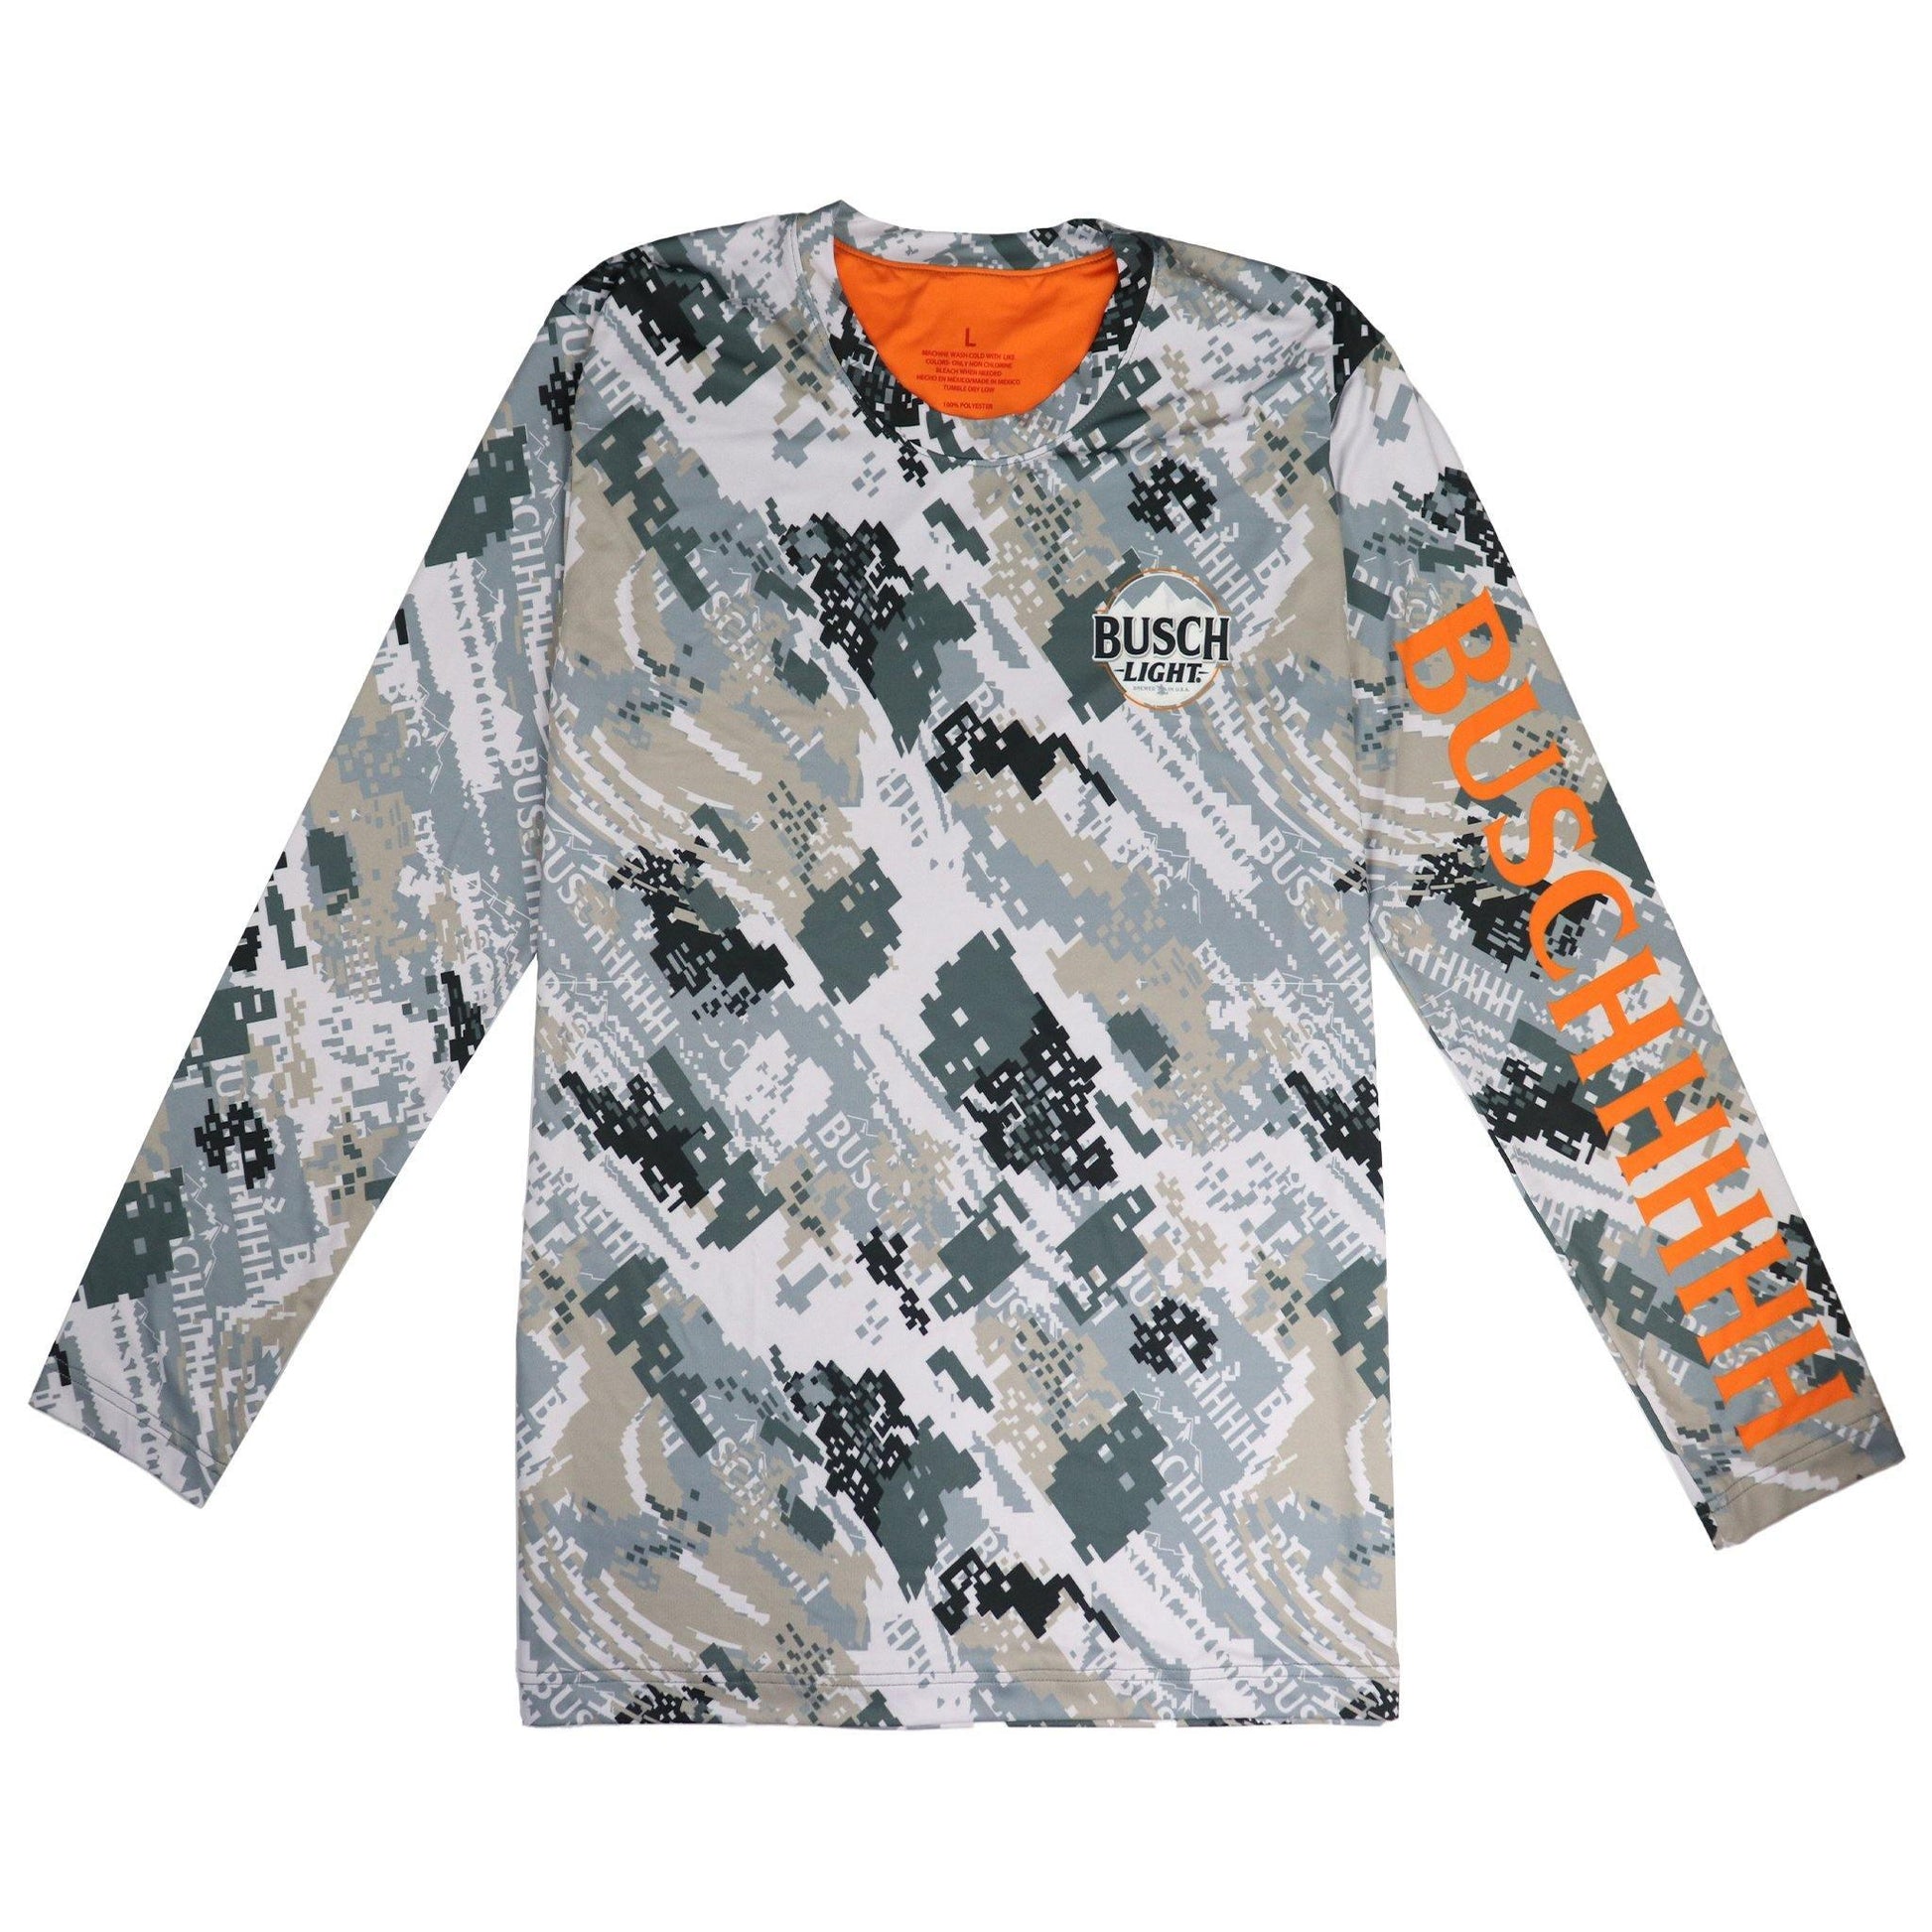 busch light grey camo long sleeve t shirt with buschhhhh in orange and capital letters on left sleeve. inside of shirt is orange